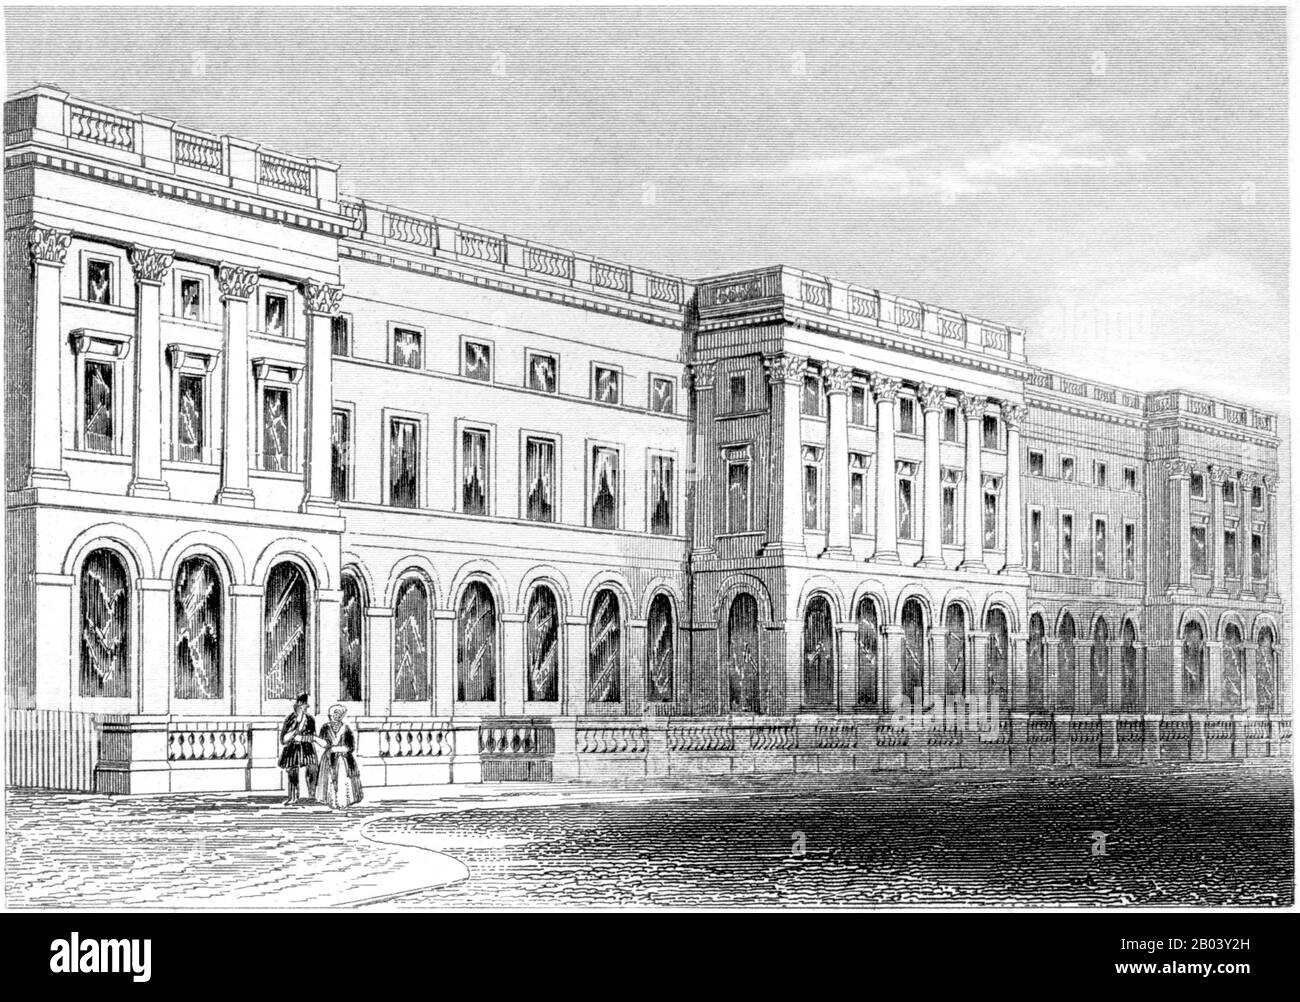 An engraving of the Kings College, Strand, London scanned at high resolution from a book printed in 1851. Believed copyright free. Stock Photo